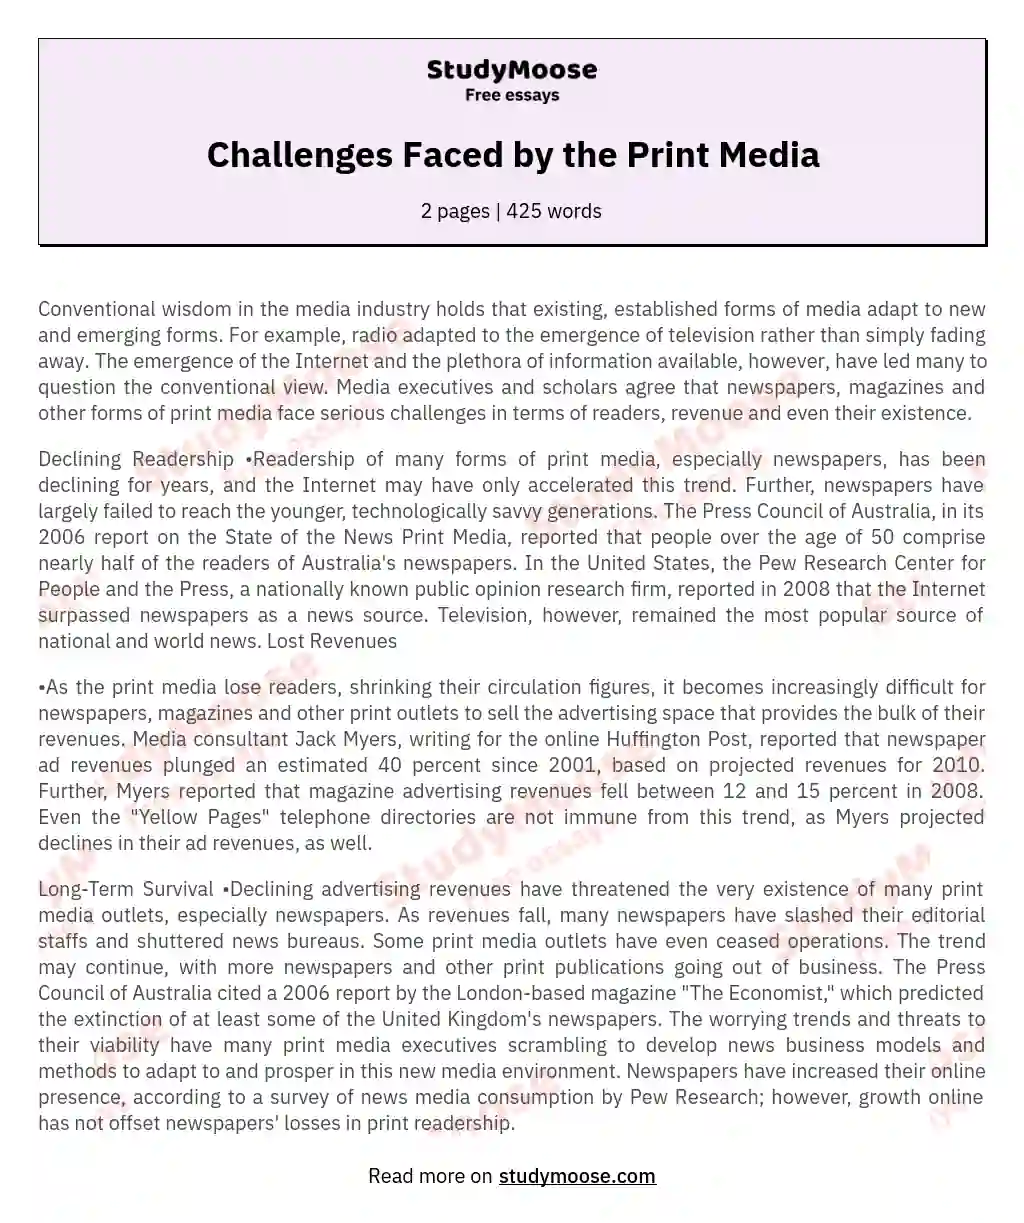 Challenges Faced by the Print Media essay